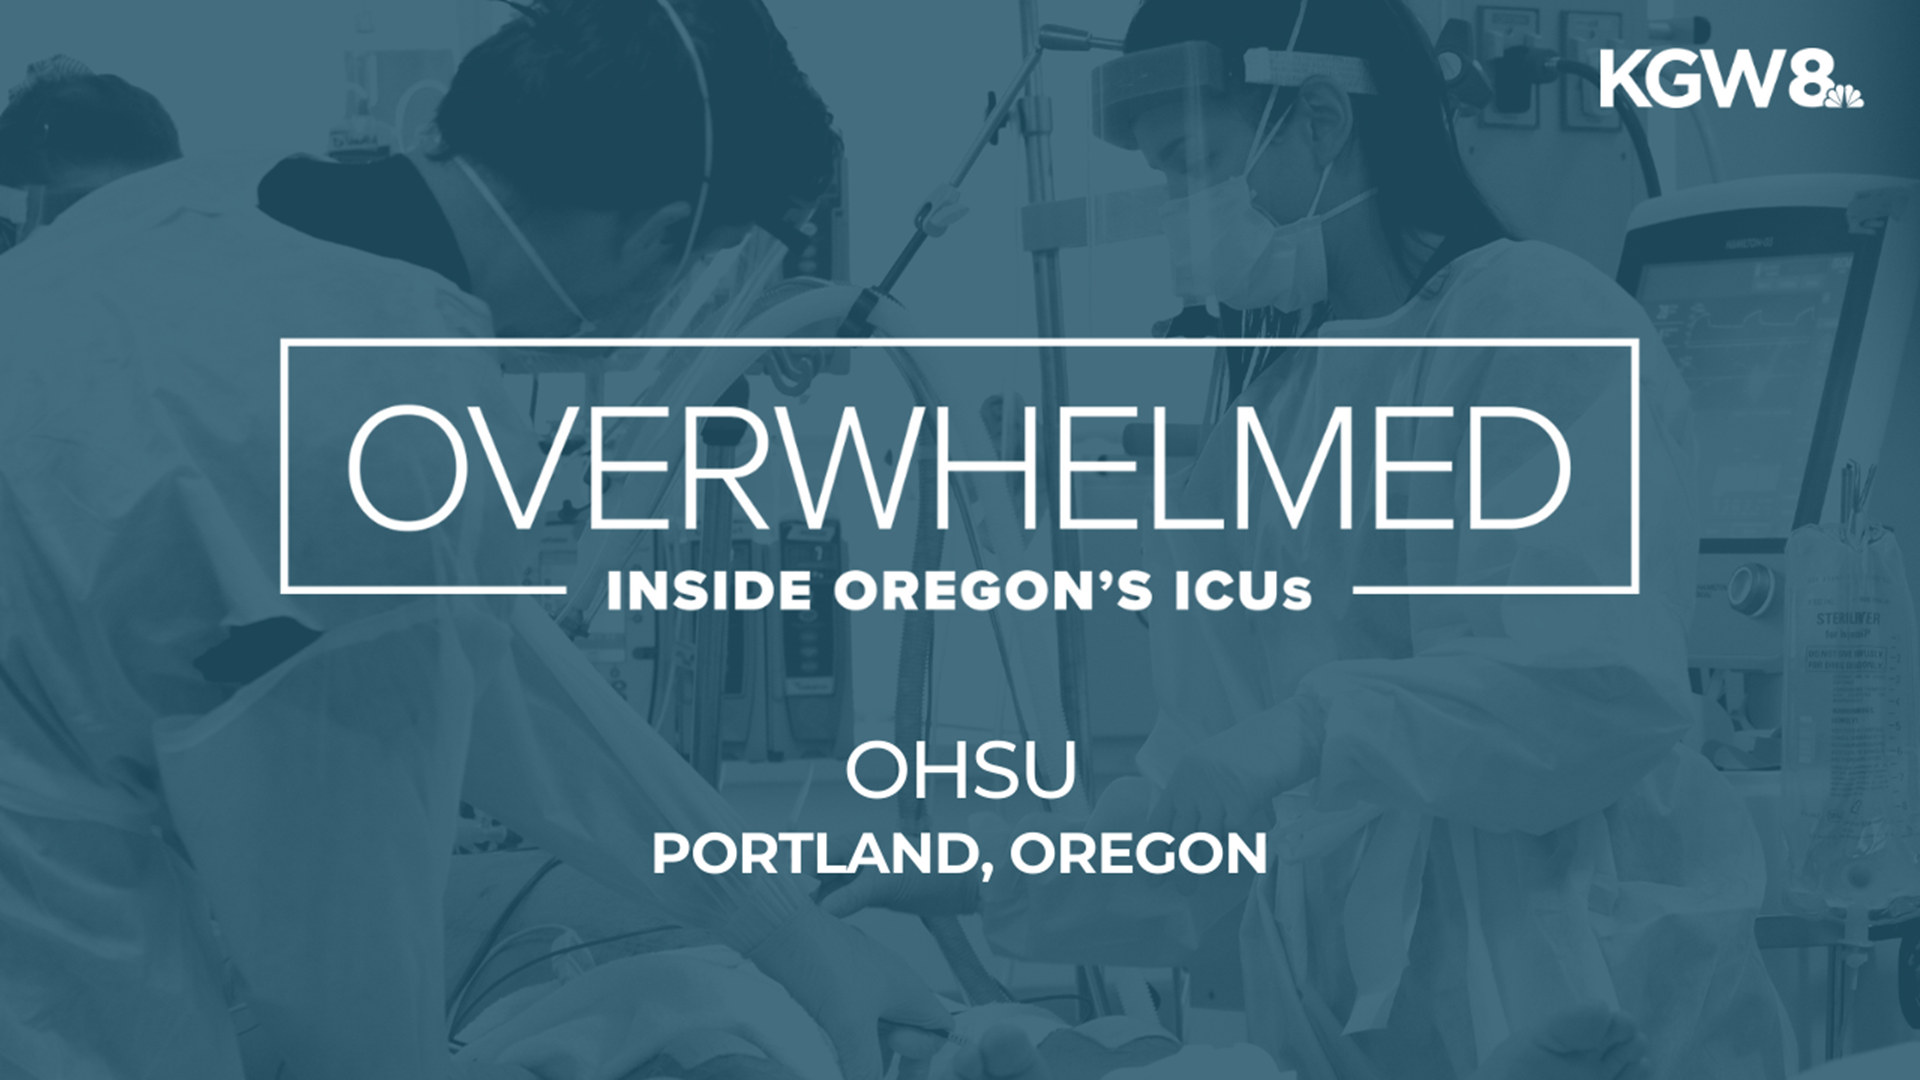 For the first time, cameras were allowed into OHSU's medical ICU. What we saw was sobering.